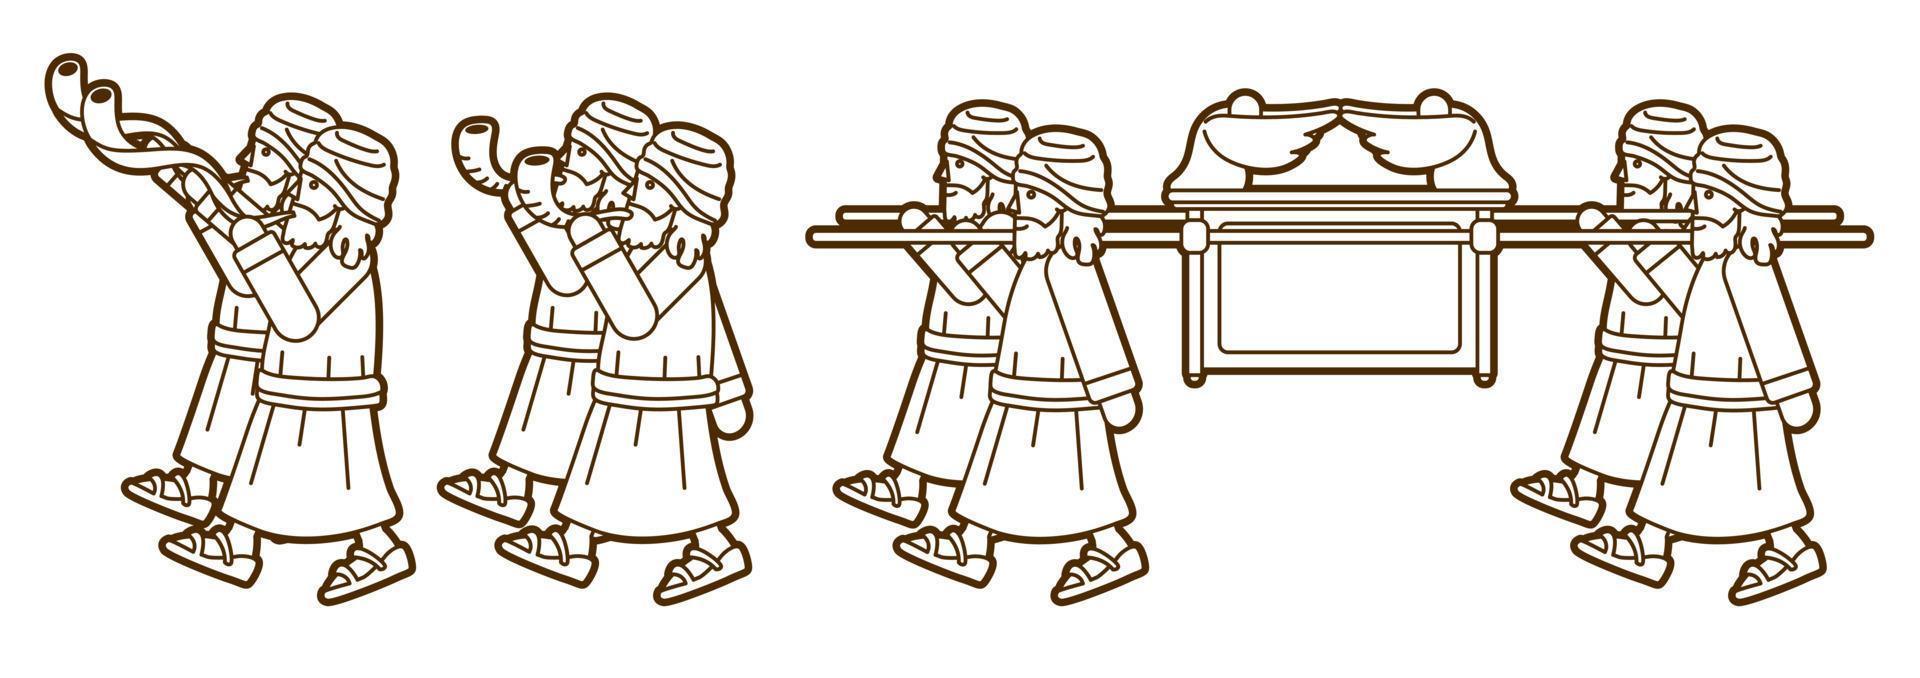 Outline Group of Levi Carrying Ark of the Covenant and  Blowing the Shofar Cartoon Graphic Vector